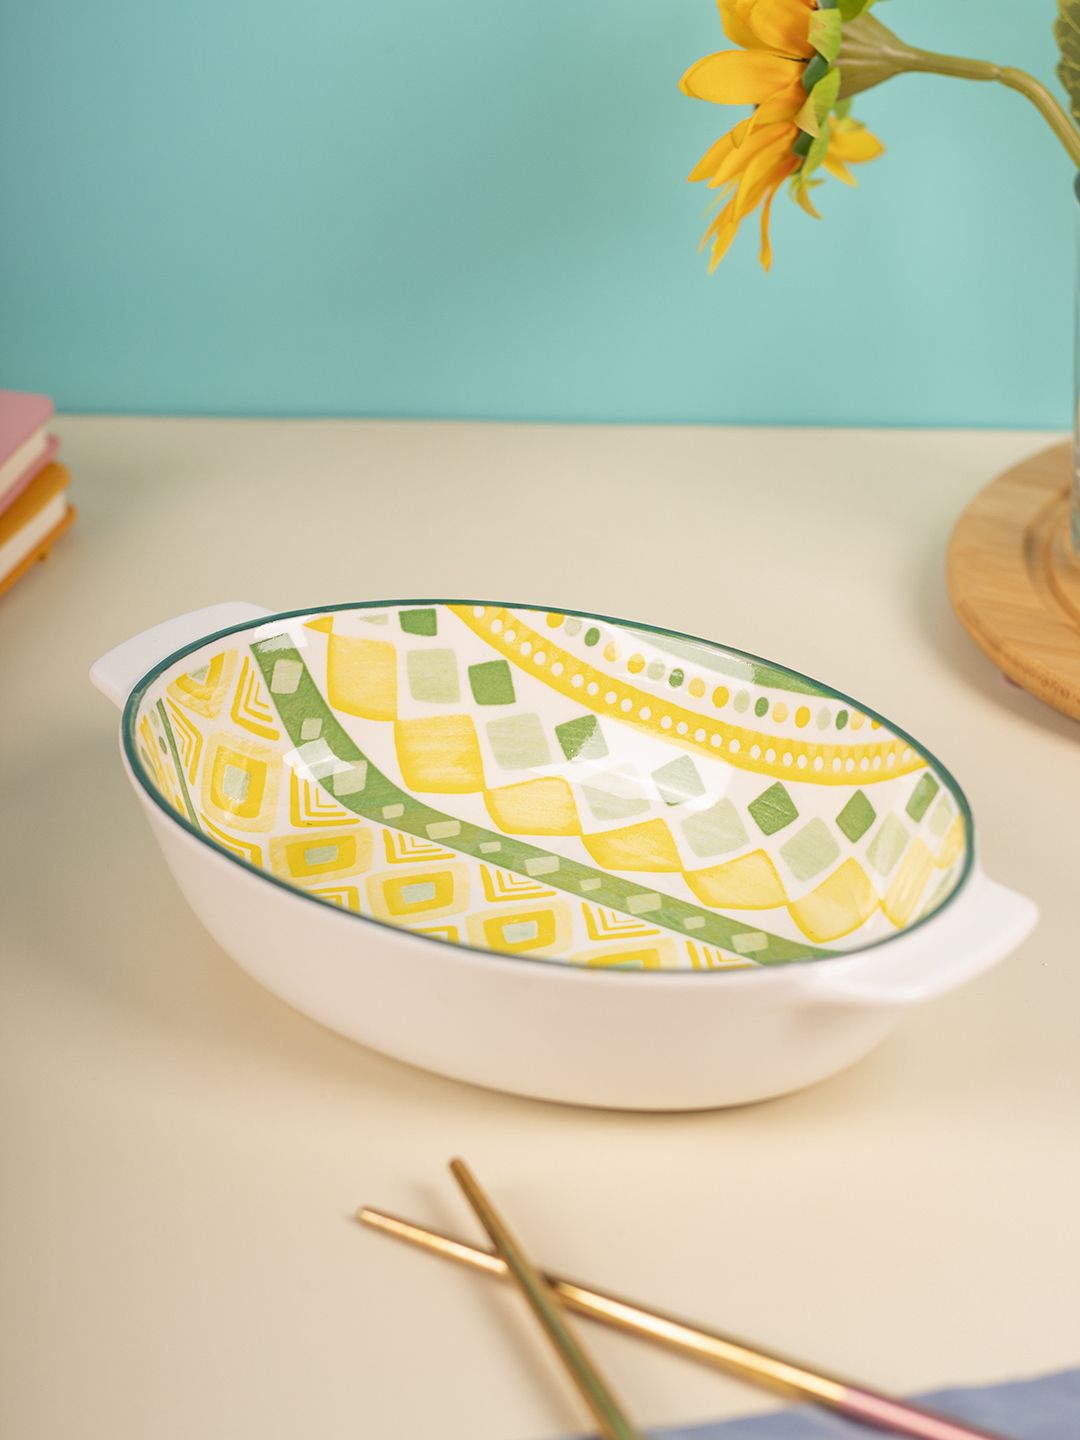 MARKET99 Yellow & White 1 Pieces Hand Painted Printed Ceramic Glossy Bowls Price in India